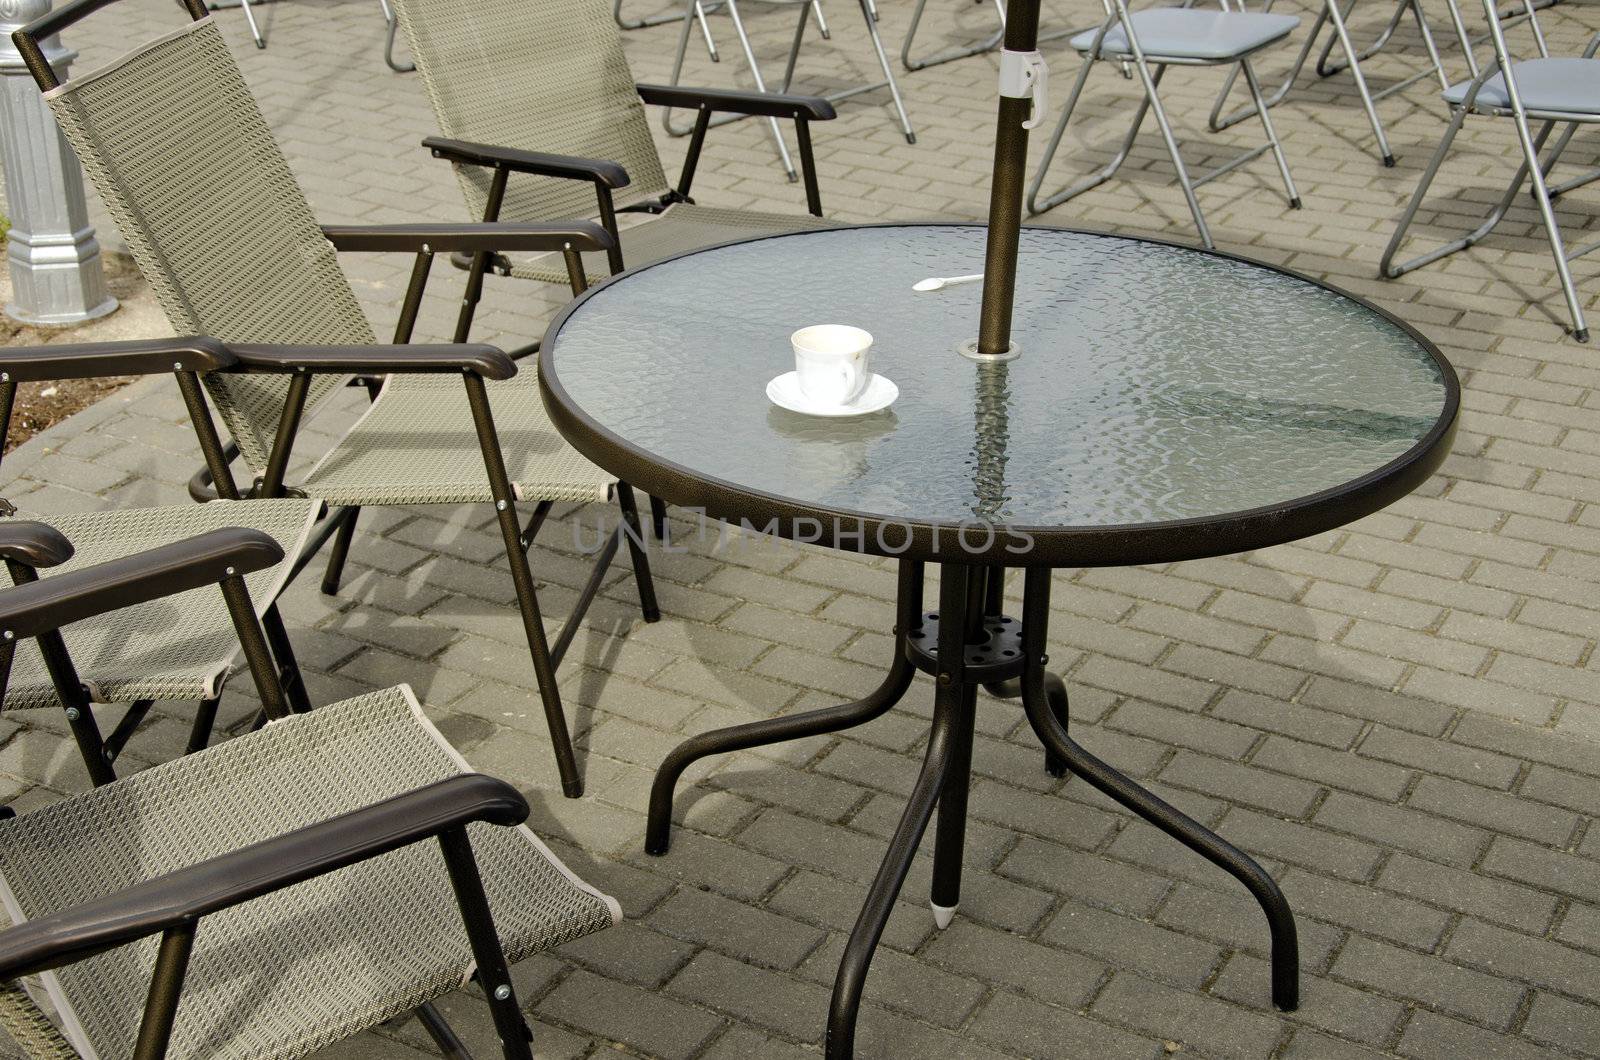 Empty coffee cup on table and chairs on pavement. Outdoor cafe.